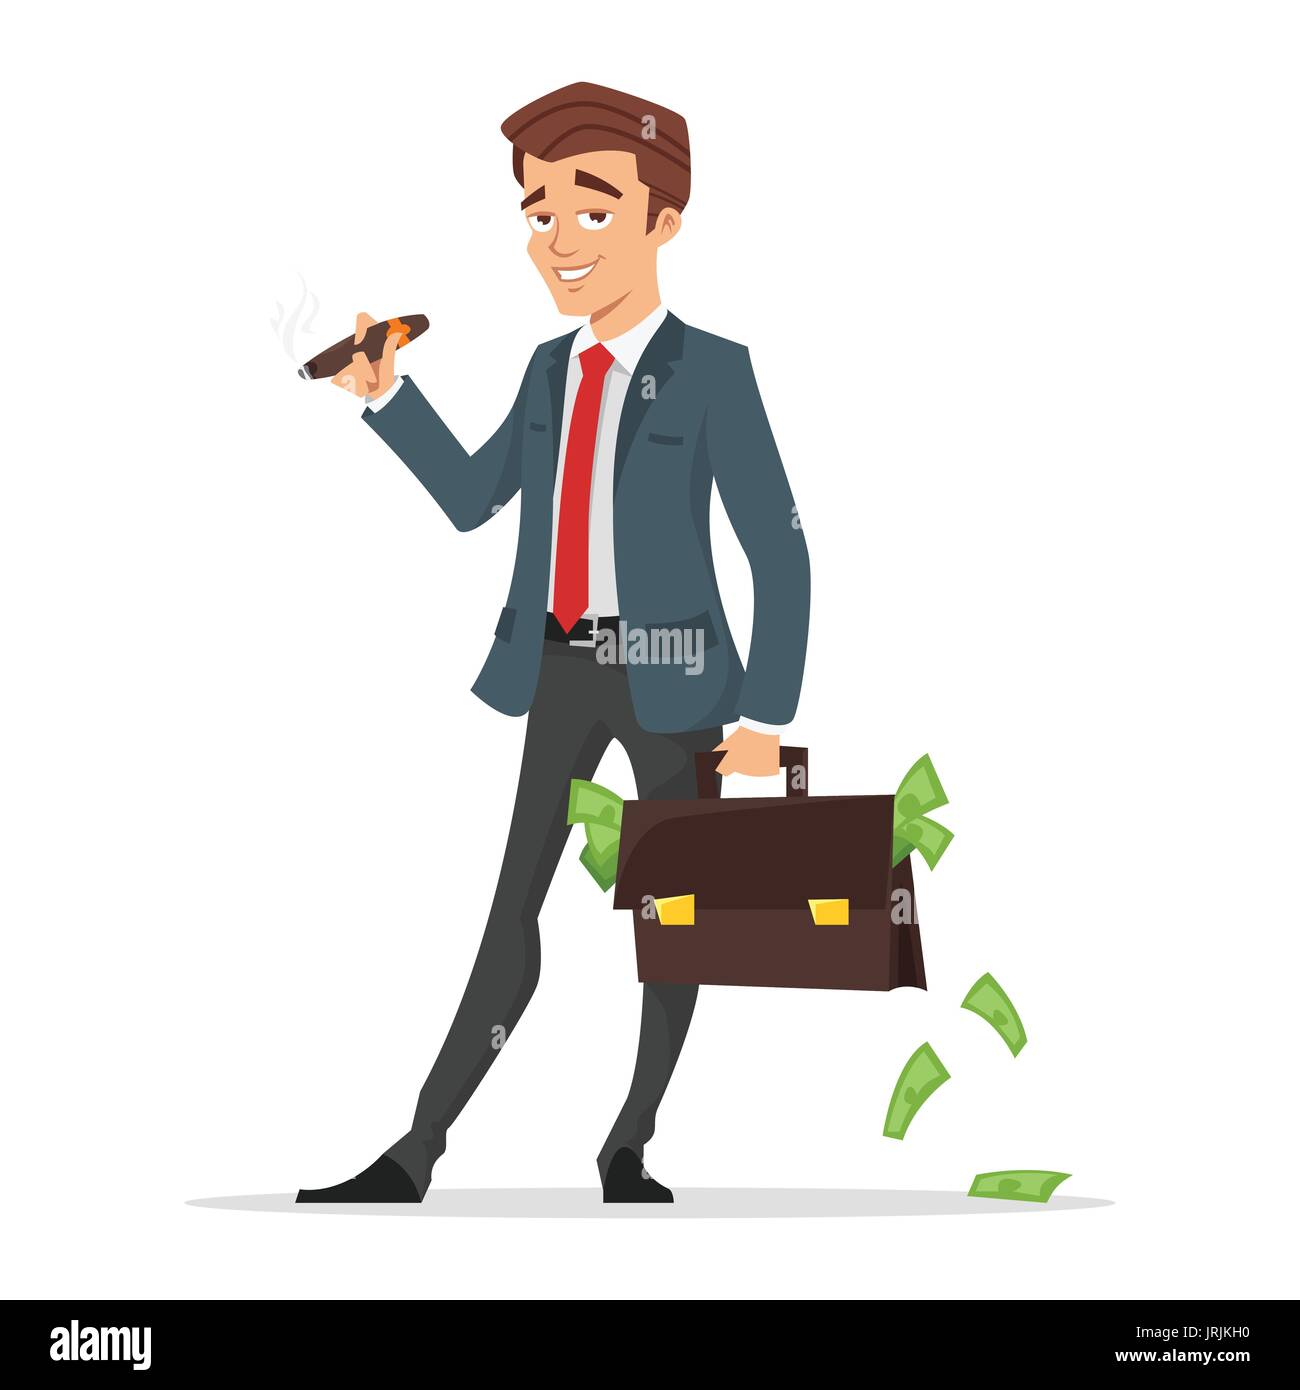 Vector cartoon style illustration of successful businessman holding a case full of money. Isolated on white background. Stock Vector